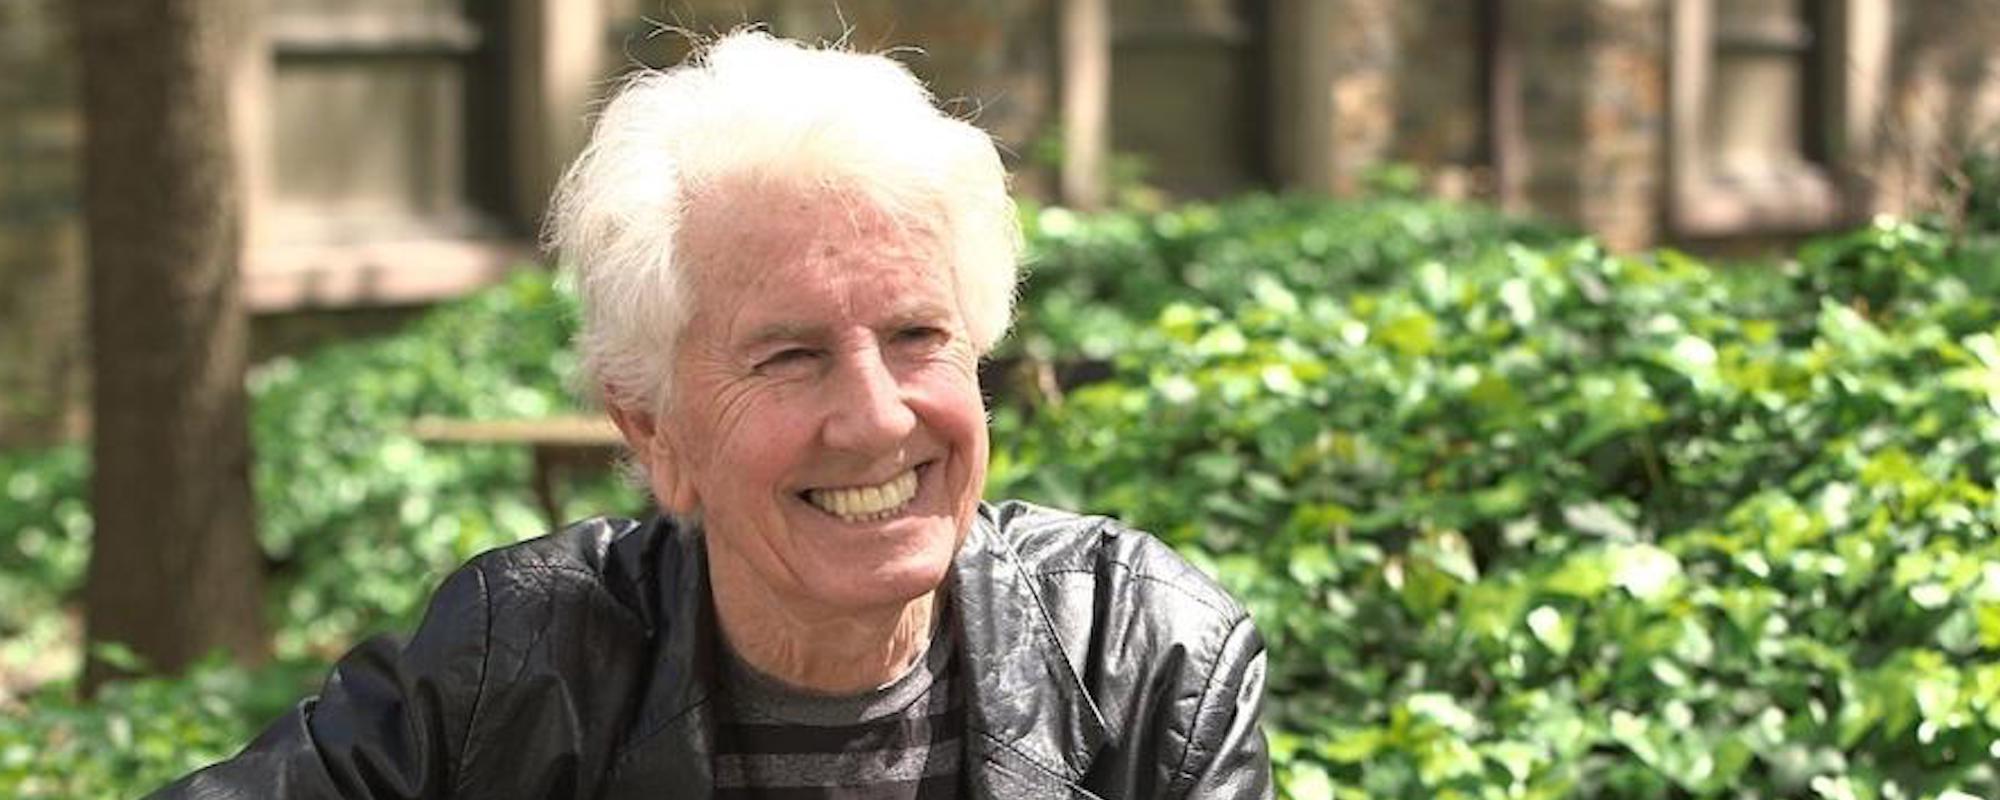 Graham Nash to Remove Music from Spotify: “I completely agree with and support my friend Neil Young”